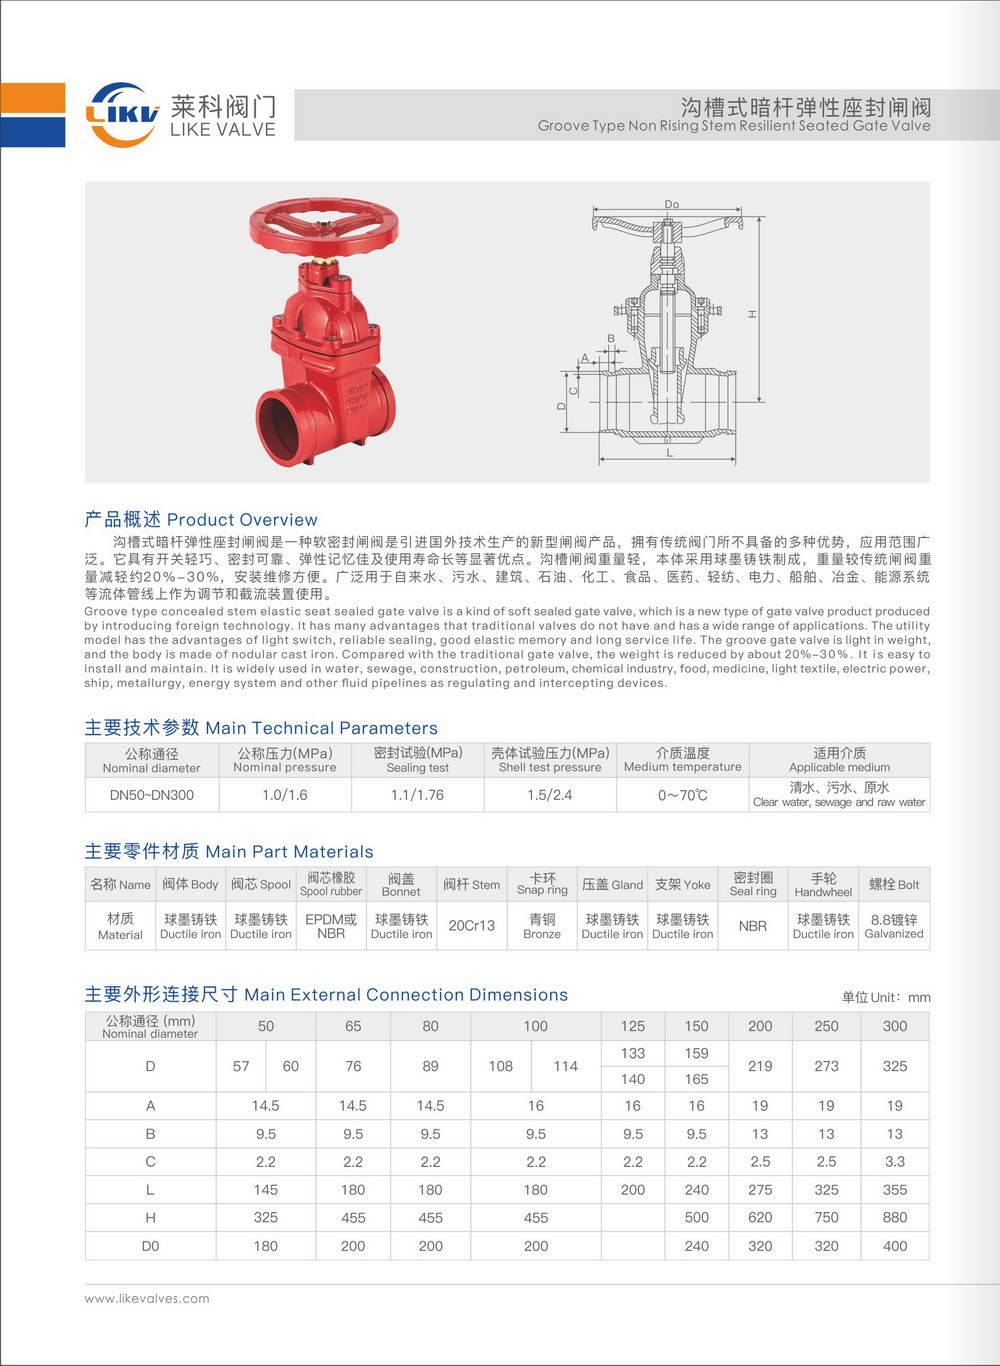 groove type concealed rod elastic seat sealing gate valve